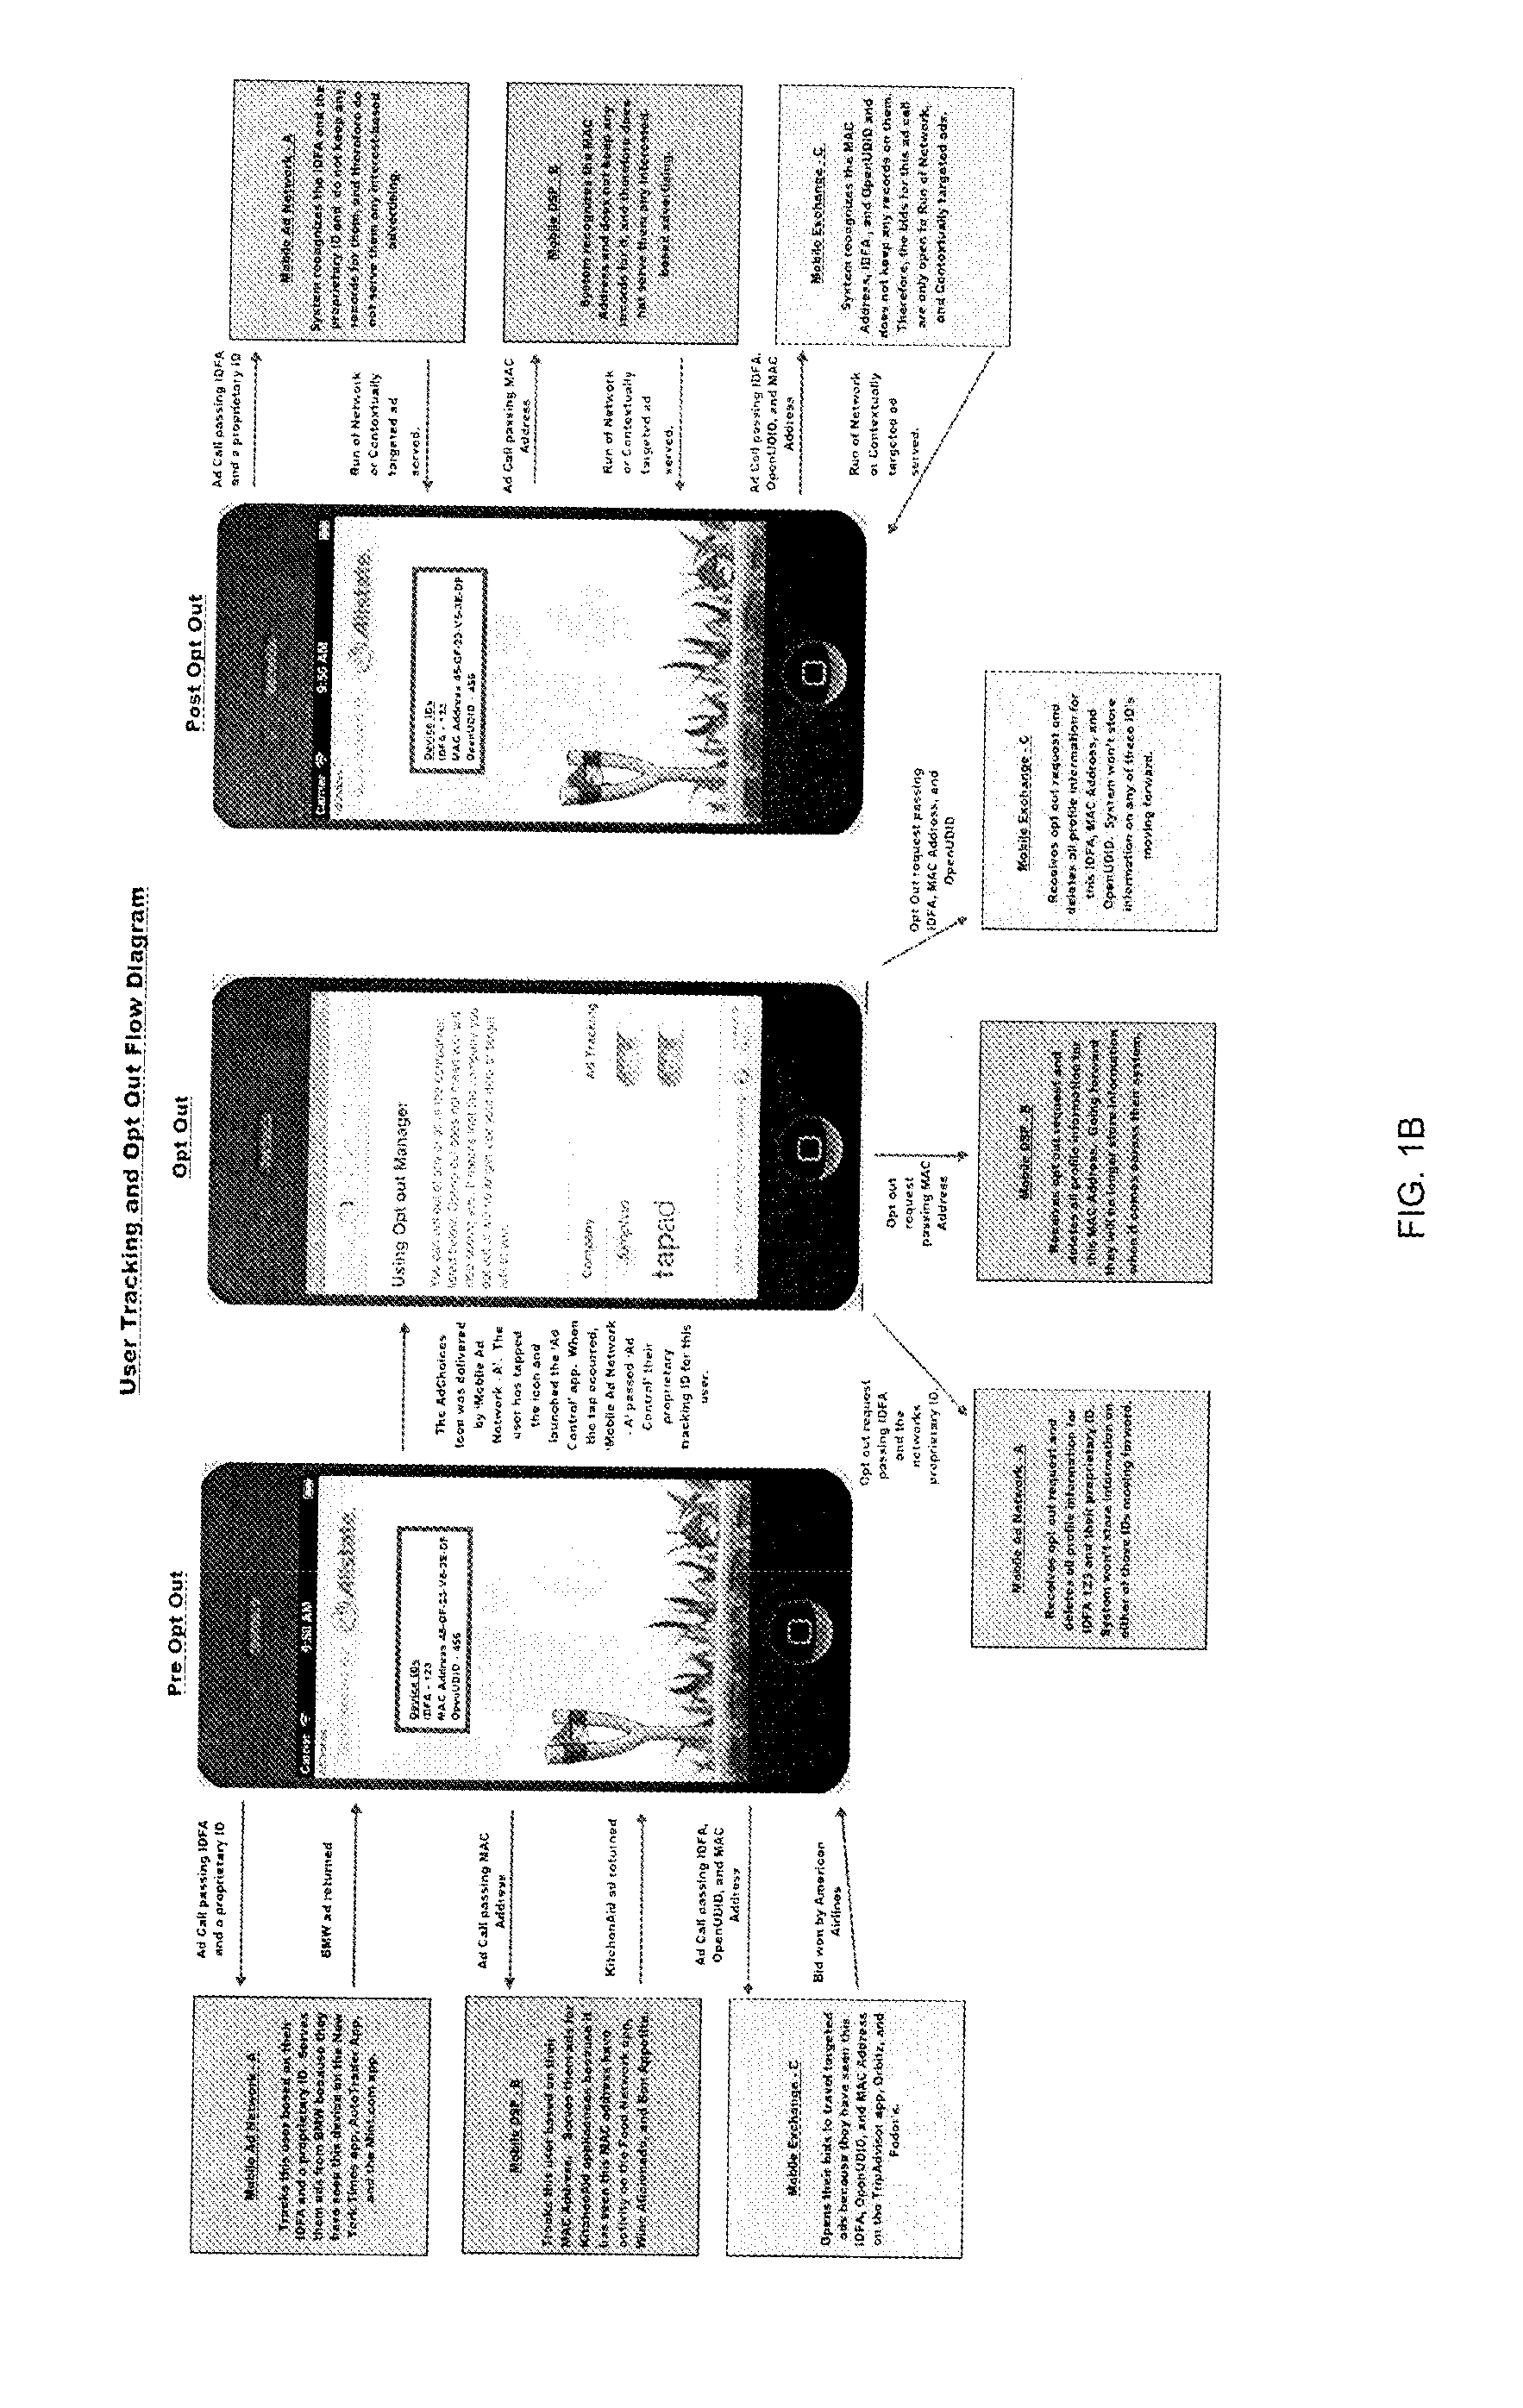 System and method for controlling targeted advertising